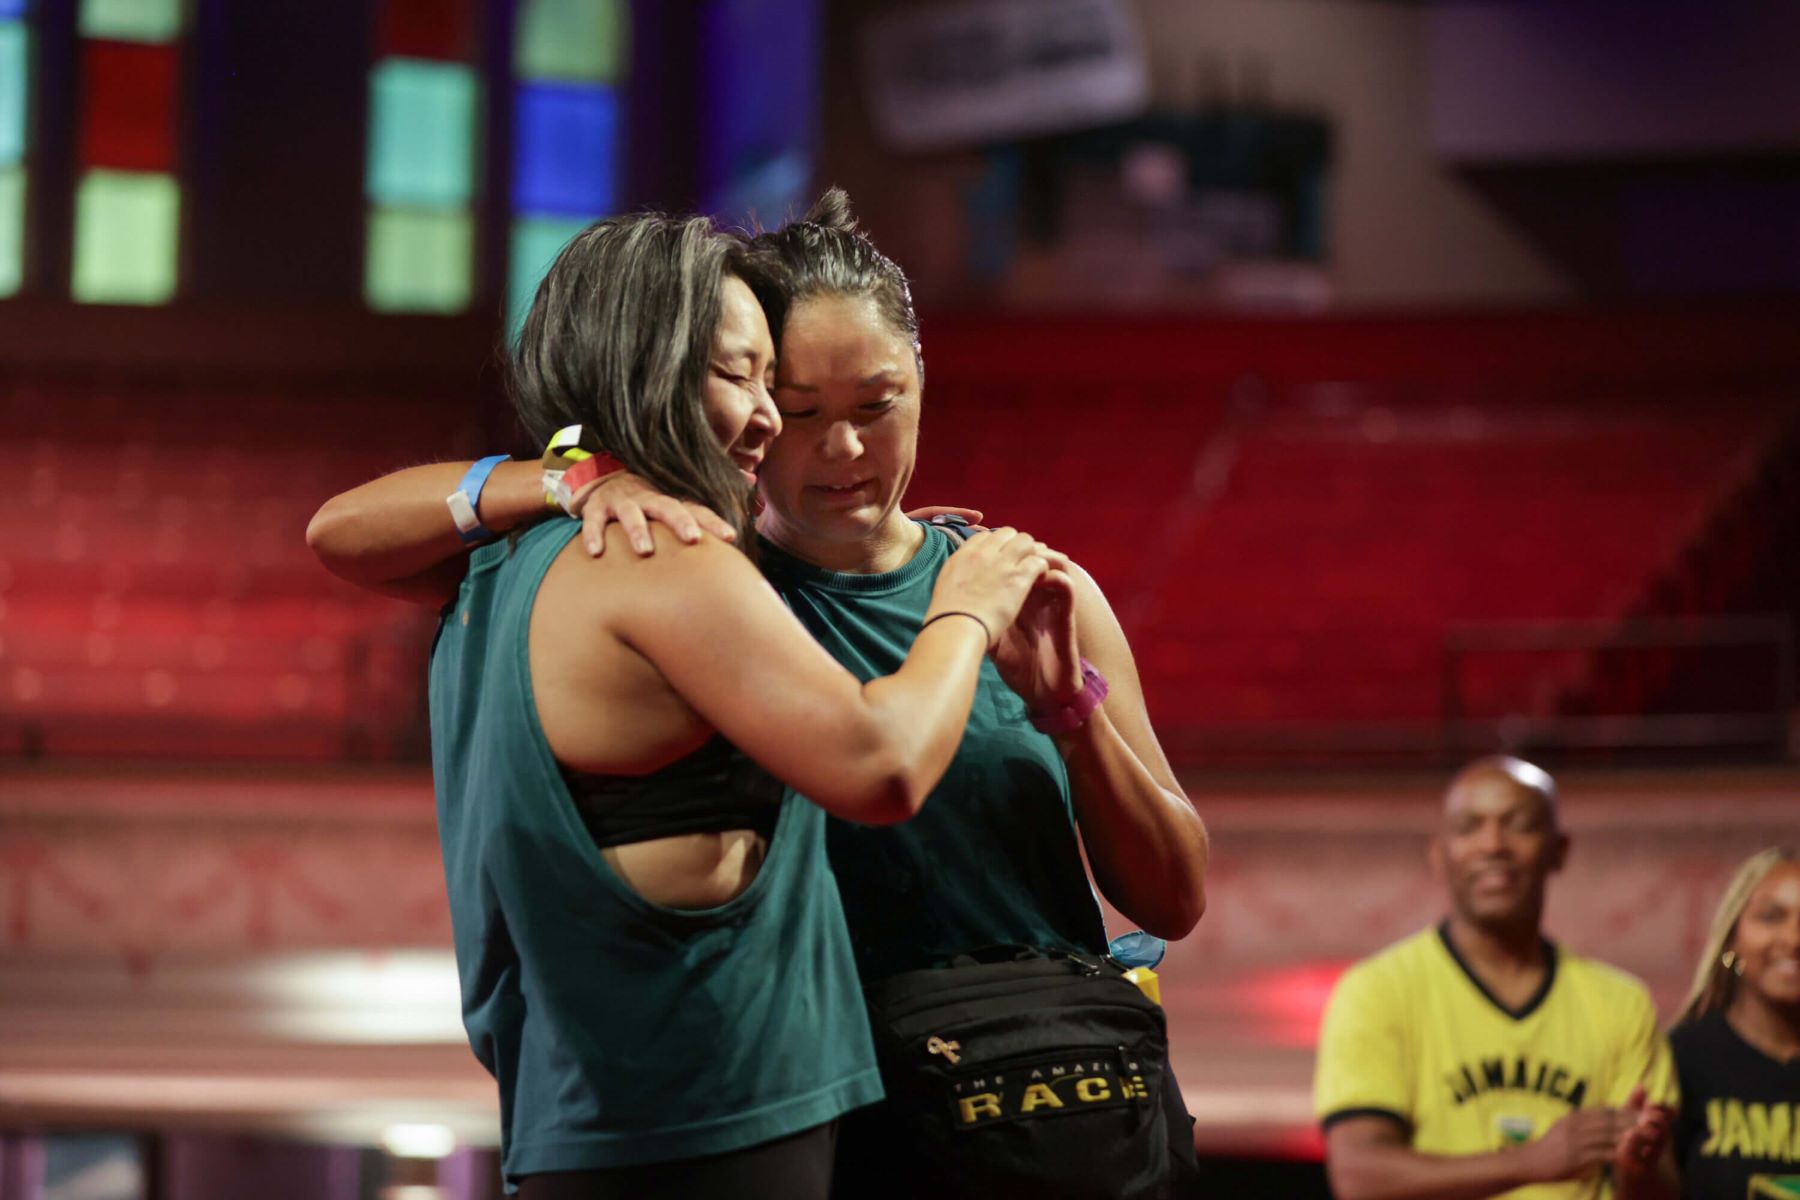 Emily Bushnell and Molly Sinert, one of the teams who competed in 'The Amazing Race' Season 34, hug at the finish line. The twins wear teal tank tops.